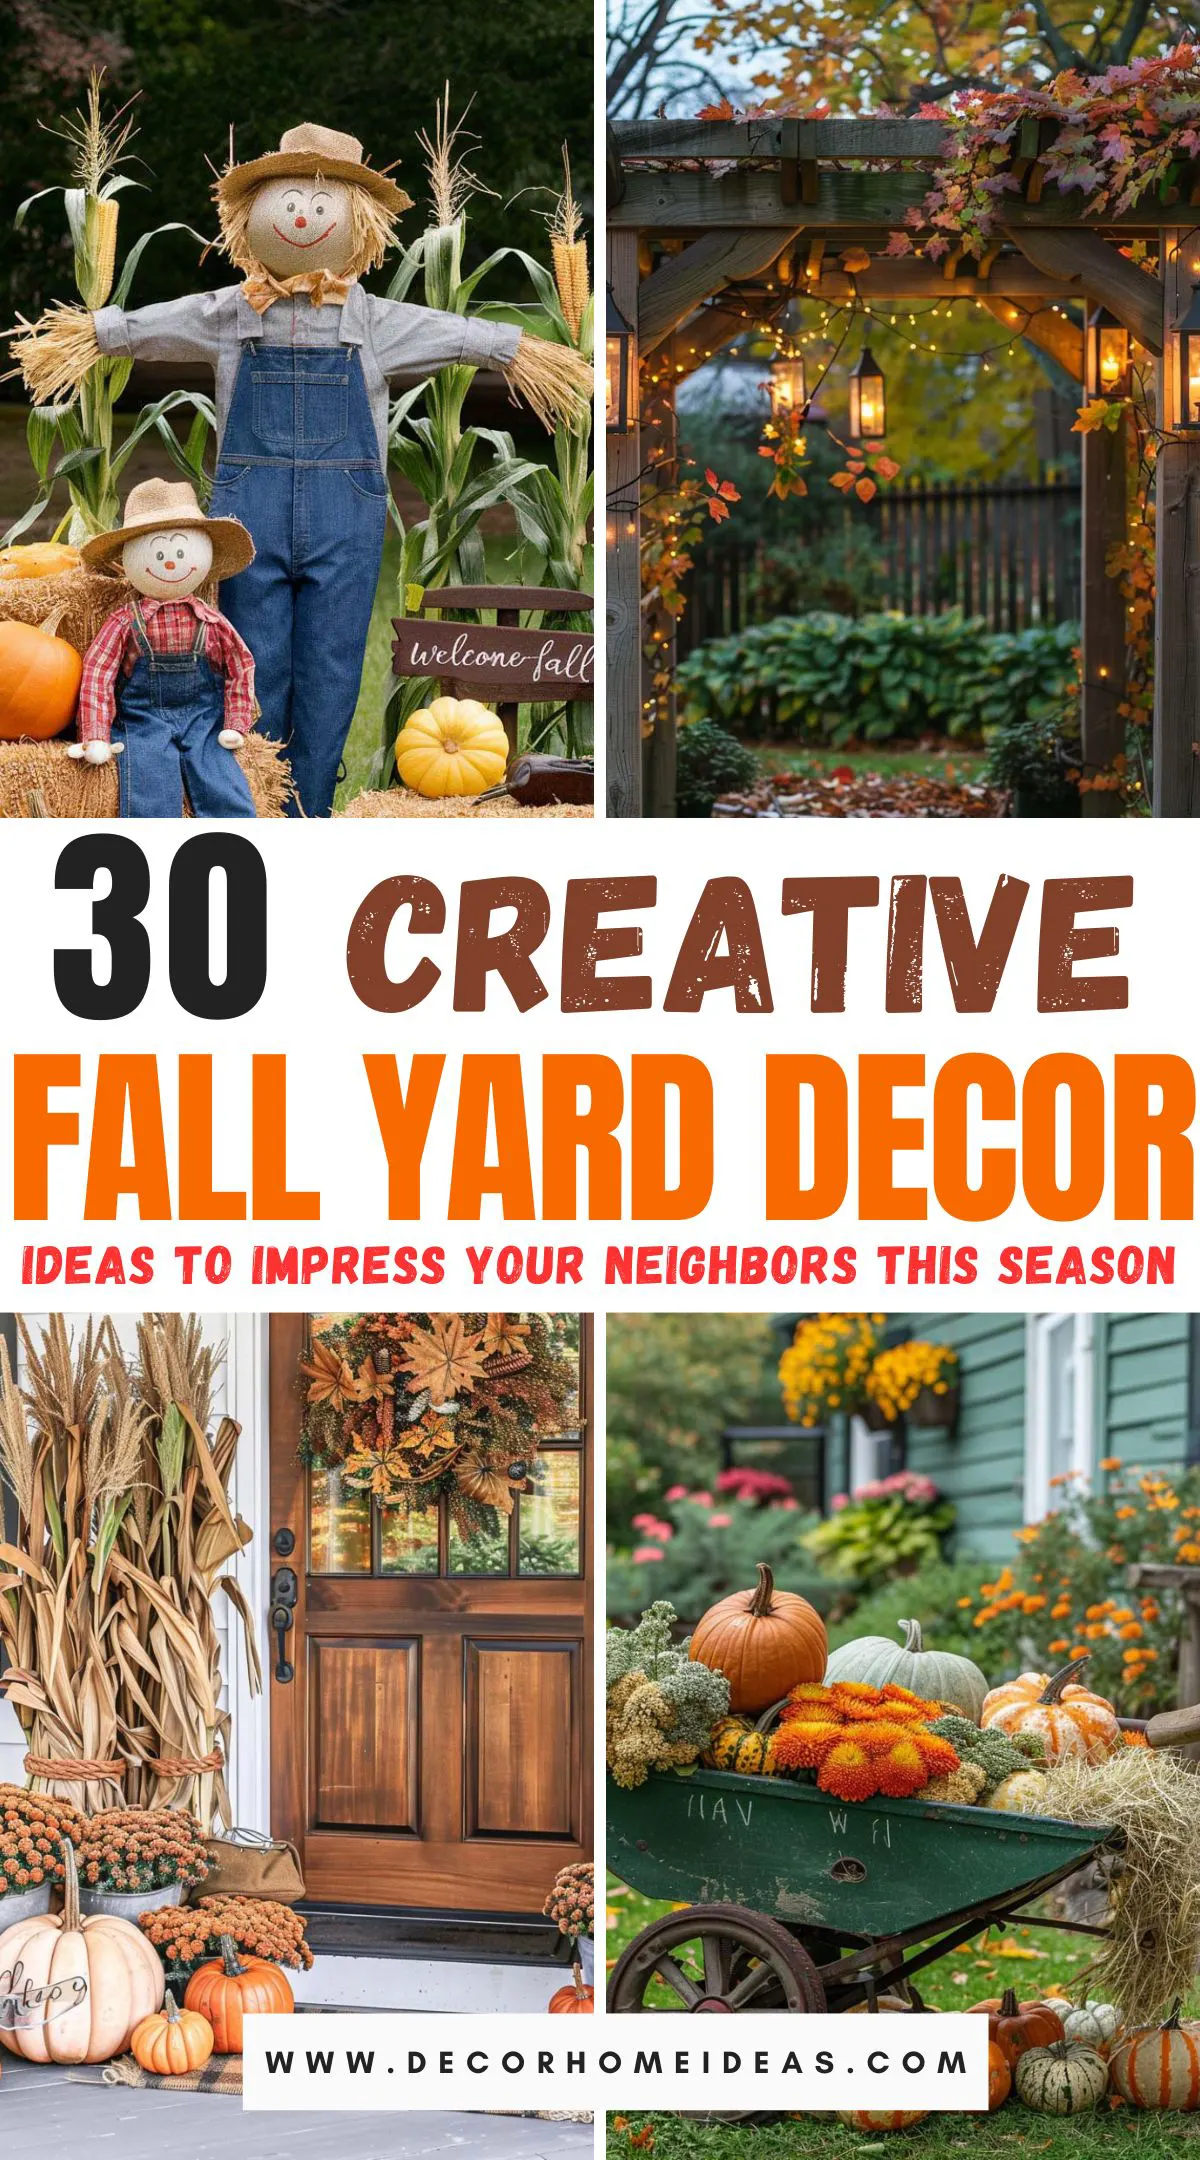 Impress your neighbors this season with 30 stunning fall yard decorations. Find a mix of classic and contemporary designs that will enhance your outdoor space. Discover tips and tricks to make your yard look professionally decorated. Make a statement and enjoy the beauty of fall with these impressive decorations.